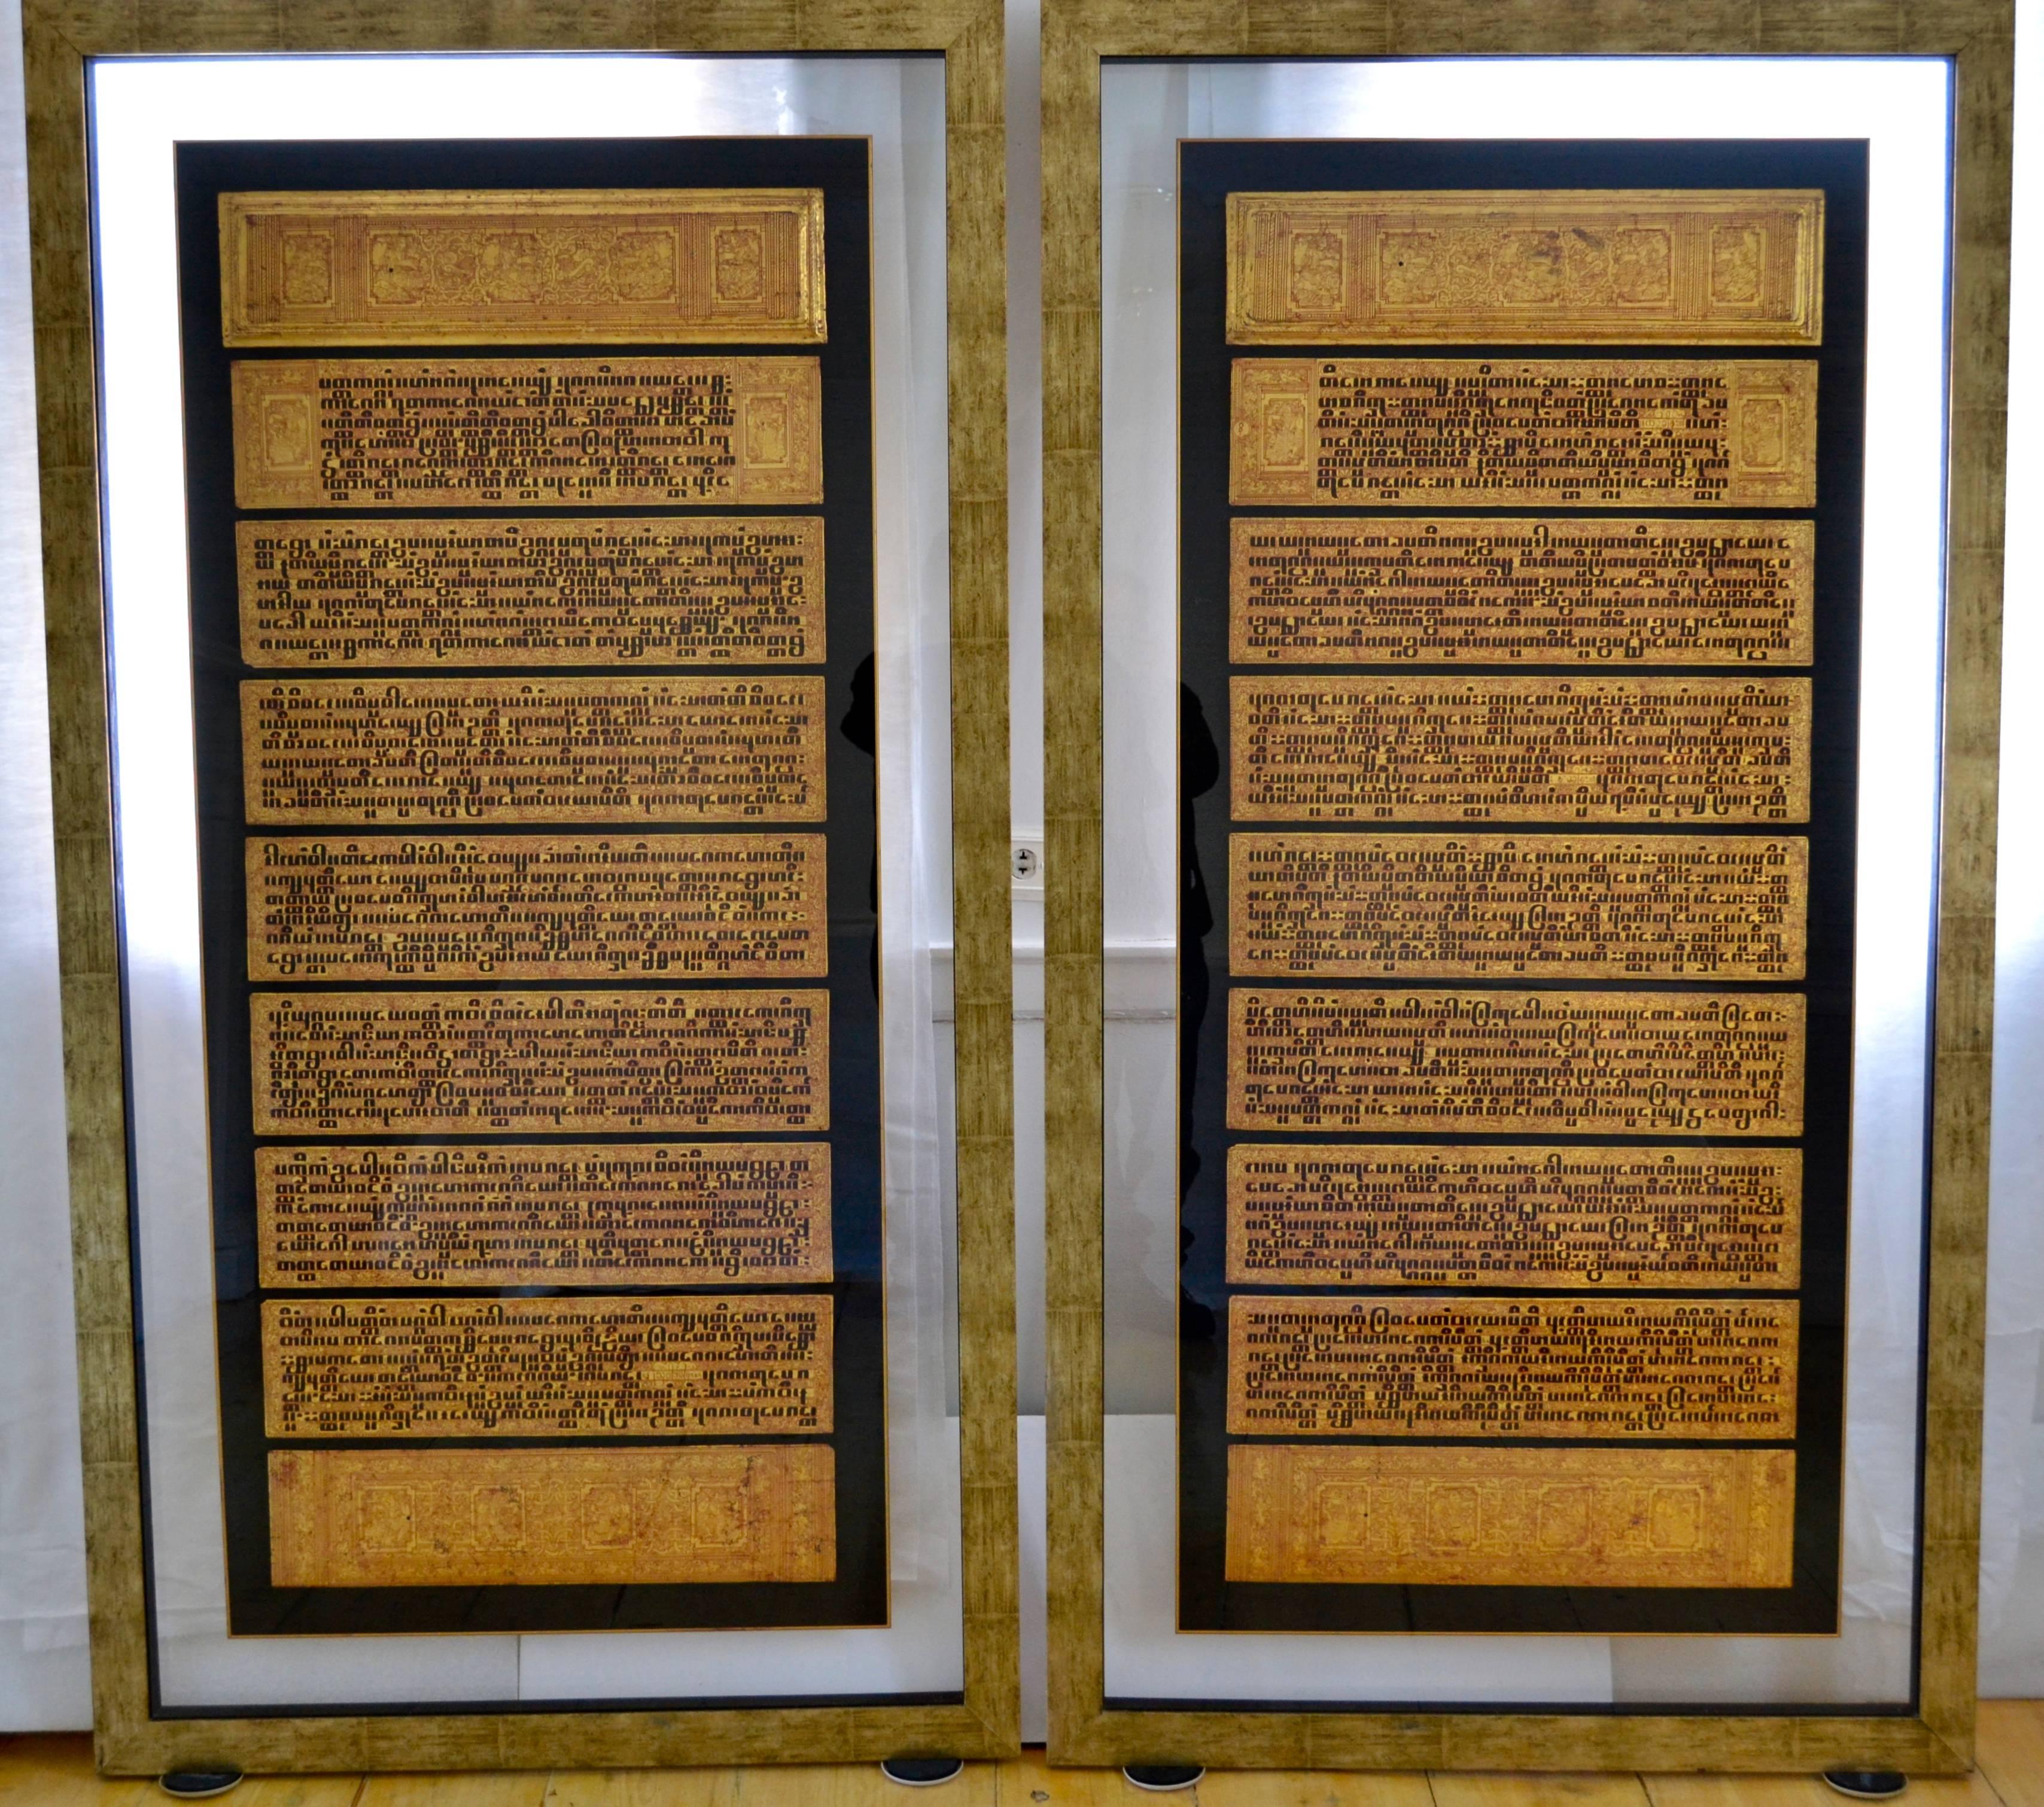 A rare pair of glass encased Burmese Kamawa-sa Buddhist texts consisting of 14 double sided unbound pages, made from thin sheets coated with layers of orange-red lacquer, which is hardened into a firm yet plaint surface. Each side has about six